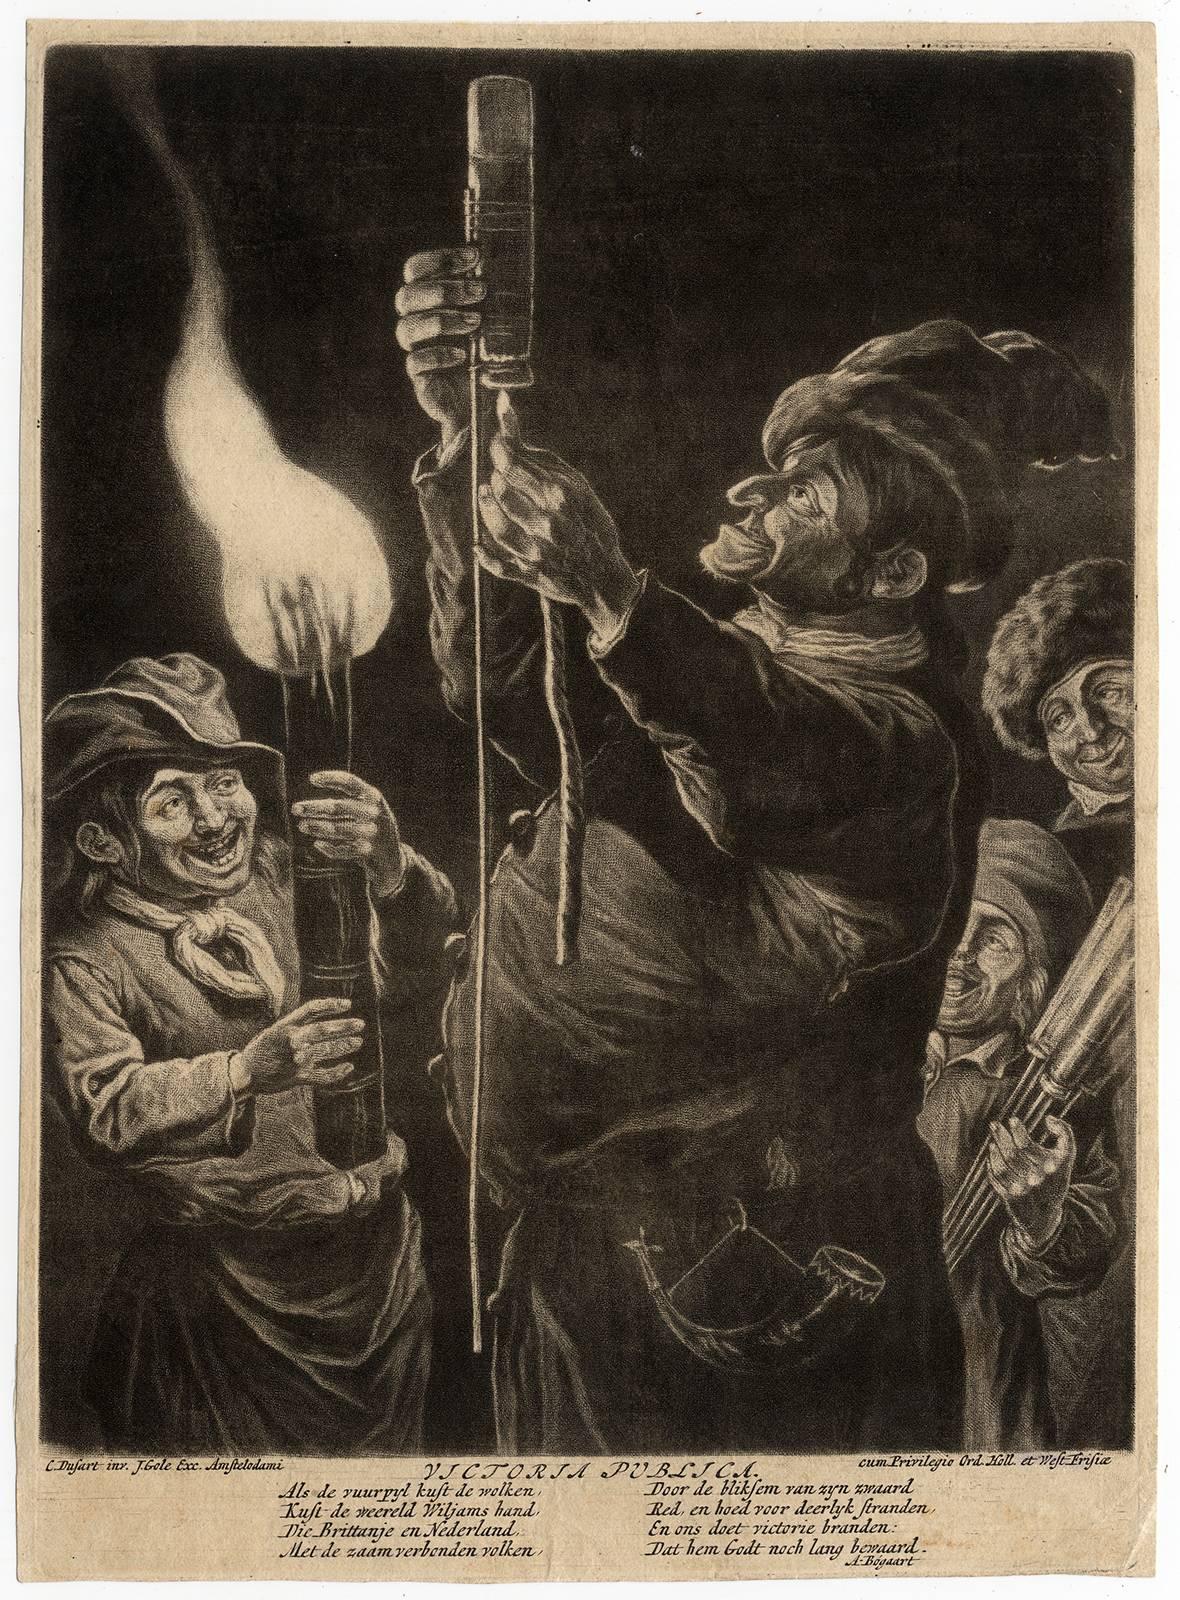 Cornelis Dusart Figurative Print - Victoria Publica. The lighting of fireworks after the conquest of Namur.